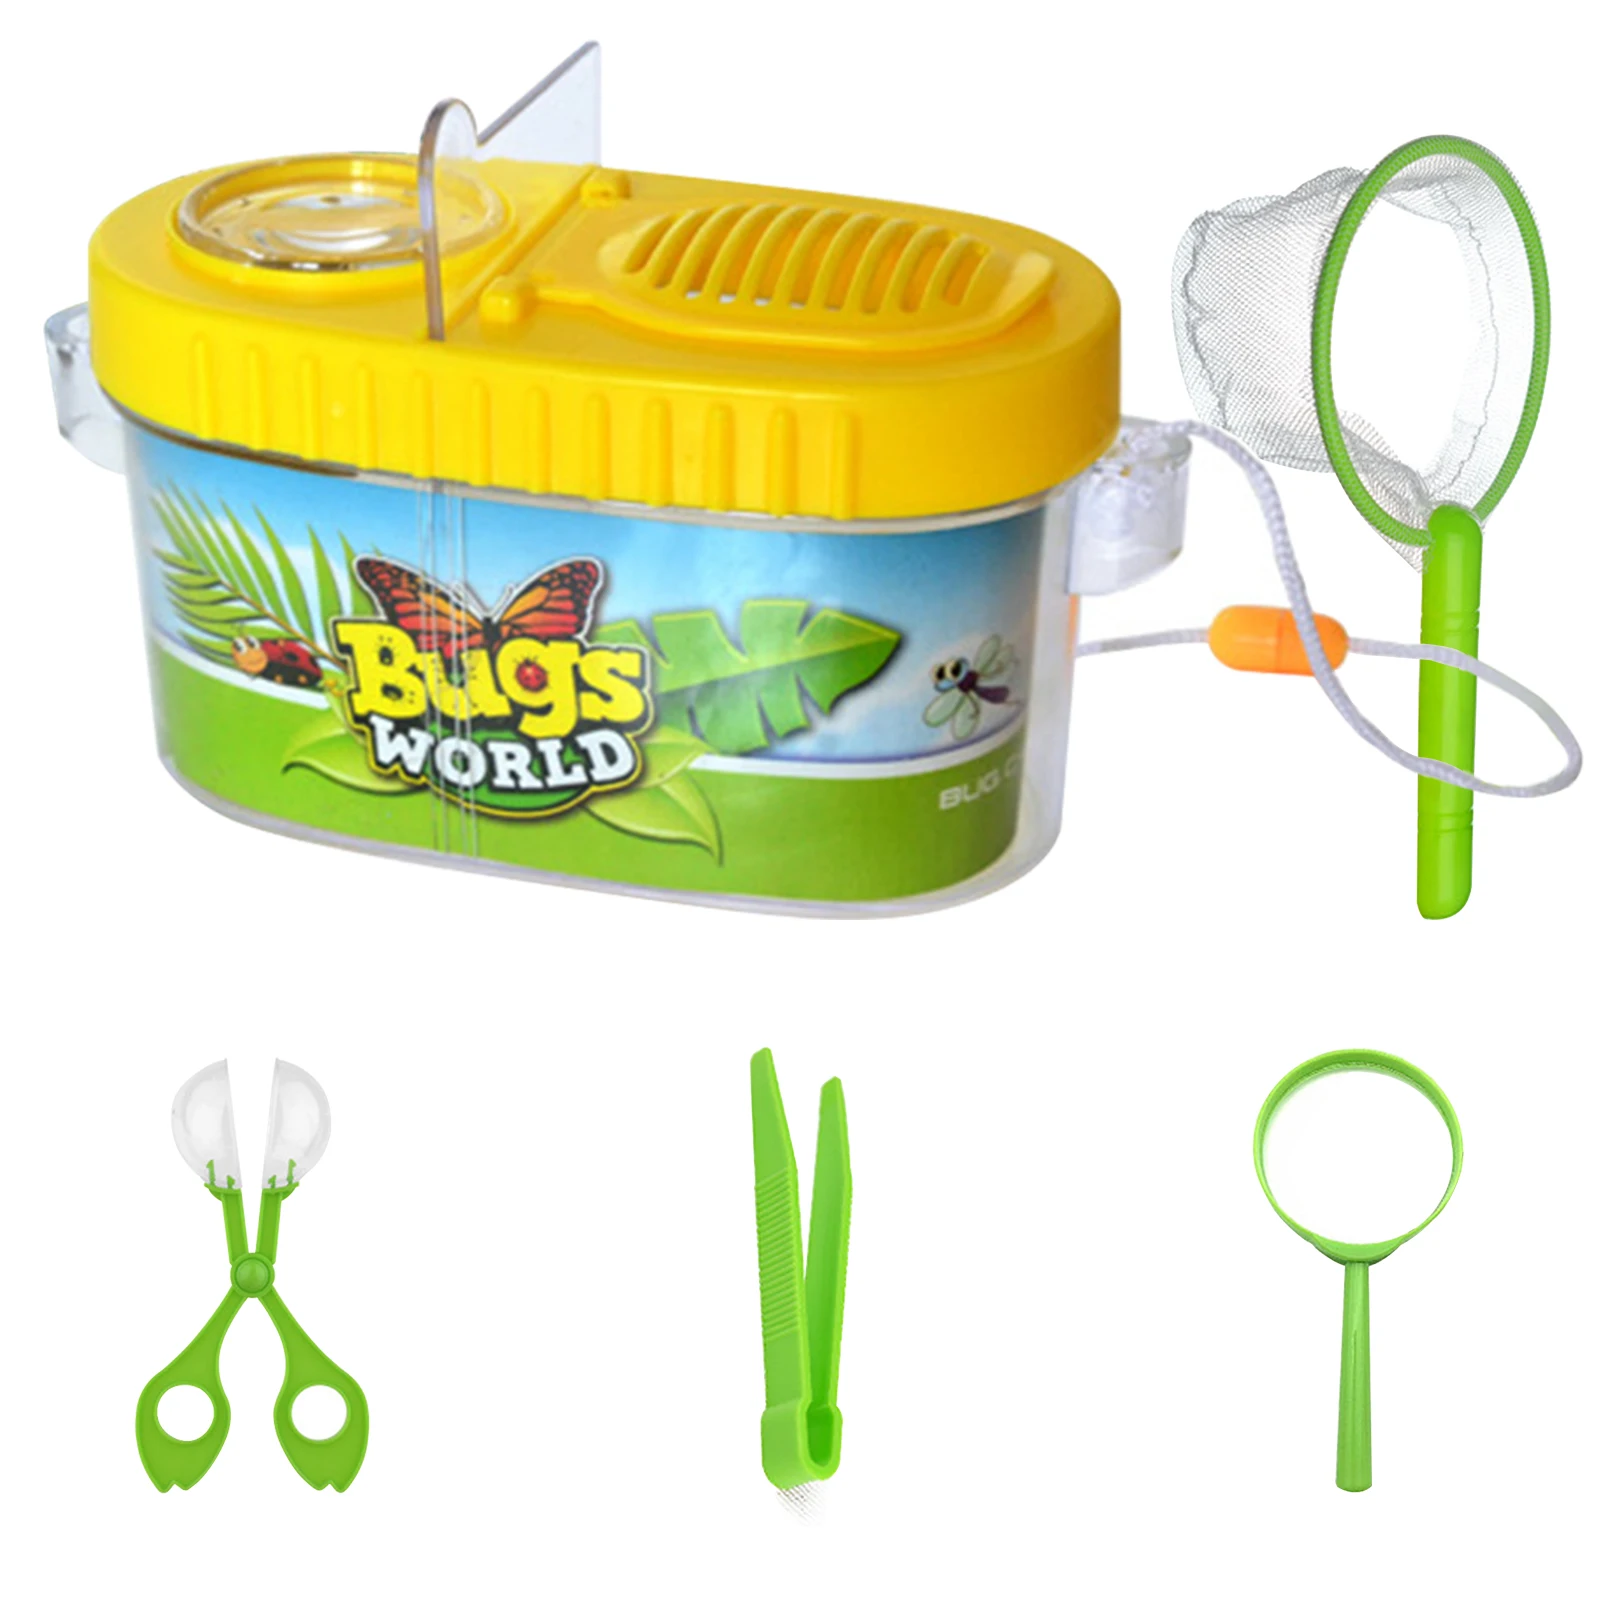 

Insect Catching Kit For Kids Creative Insect Observation Box Educational Explorer Toy Contains Magnifying Glass Clip Net Fun